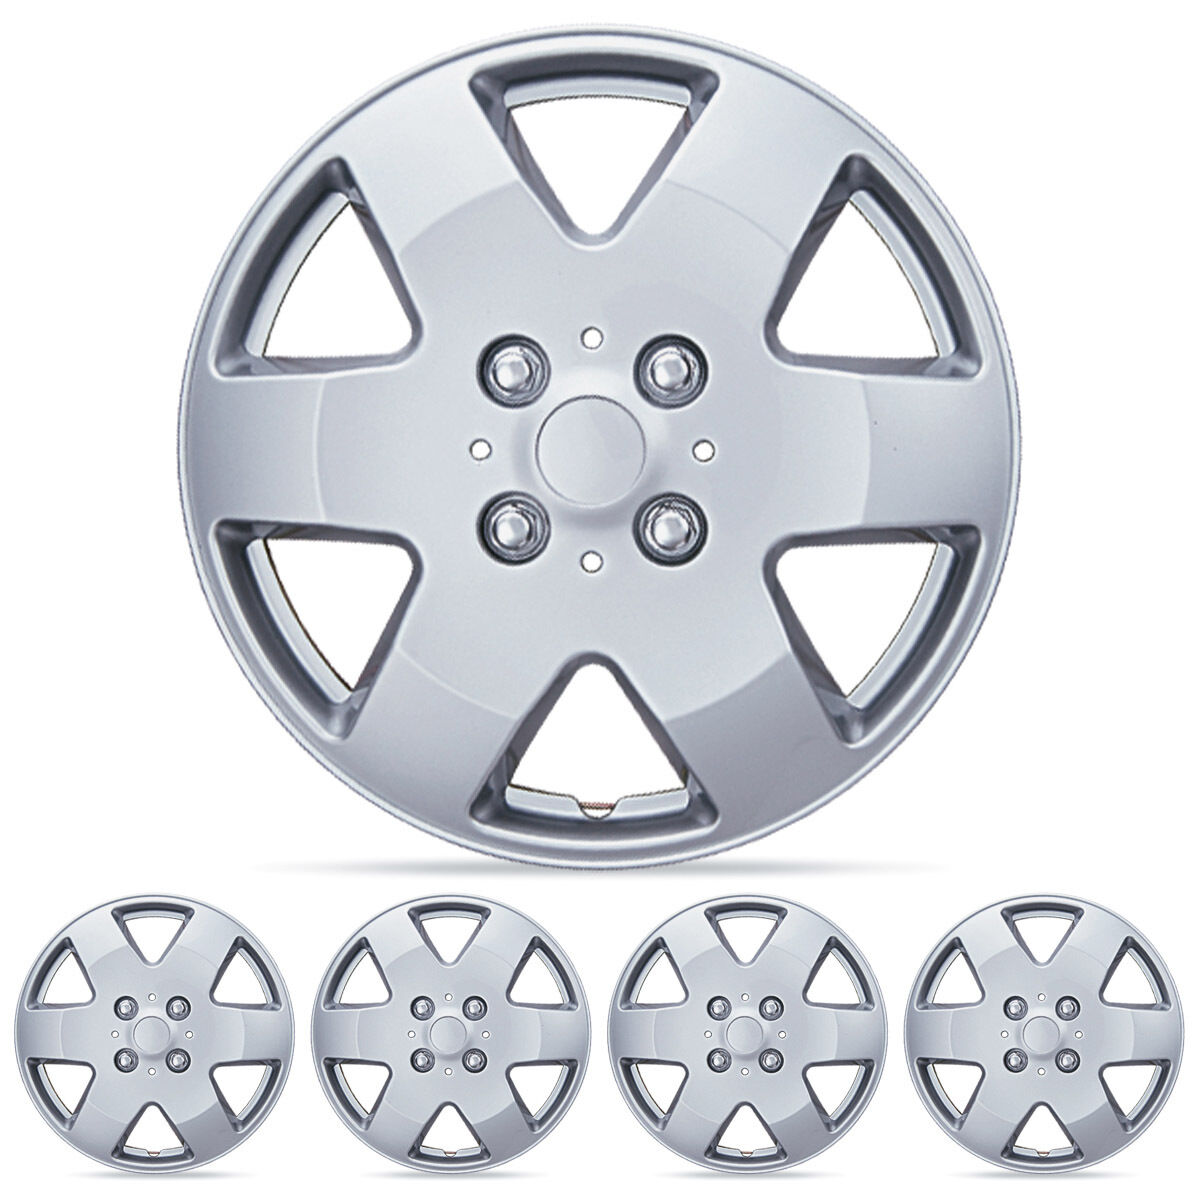 4 Piece Set Hubcap 15 Inch OEM Replacement Fit Full Lug Rim Covers Snap On Inst.